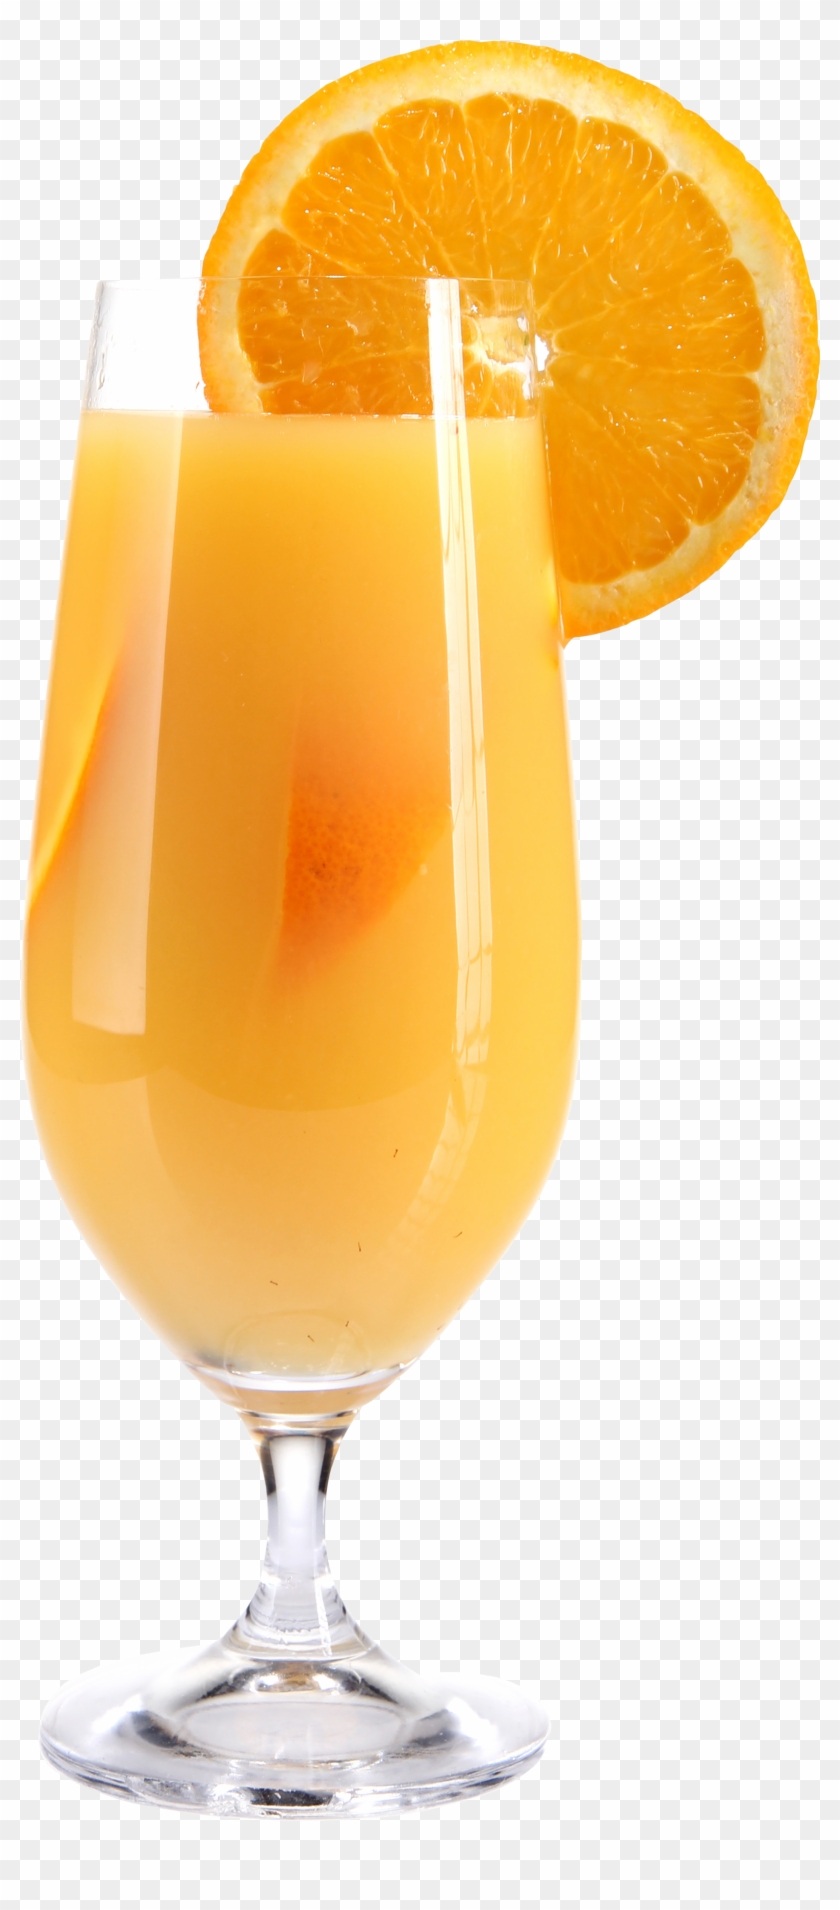 Glass Png Image - Orange Juice In A Wine Glass #415097